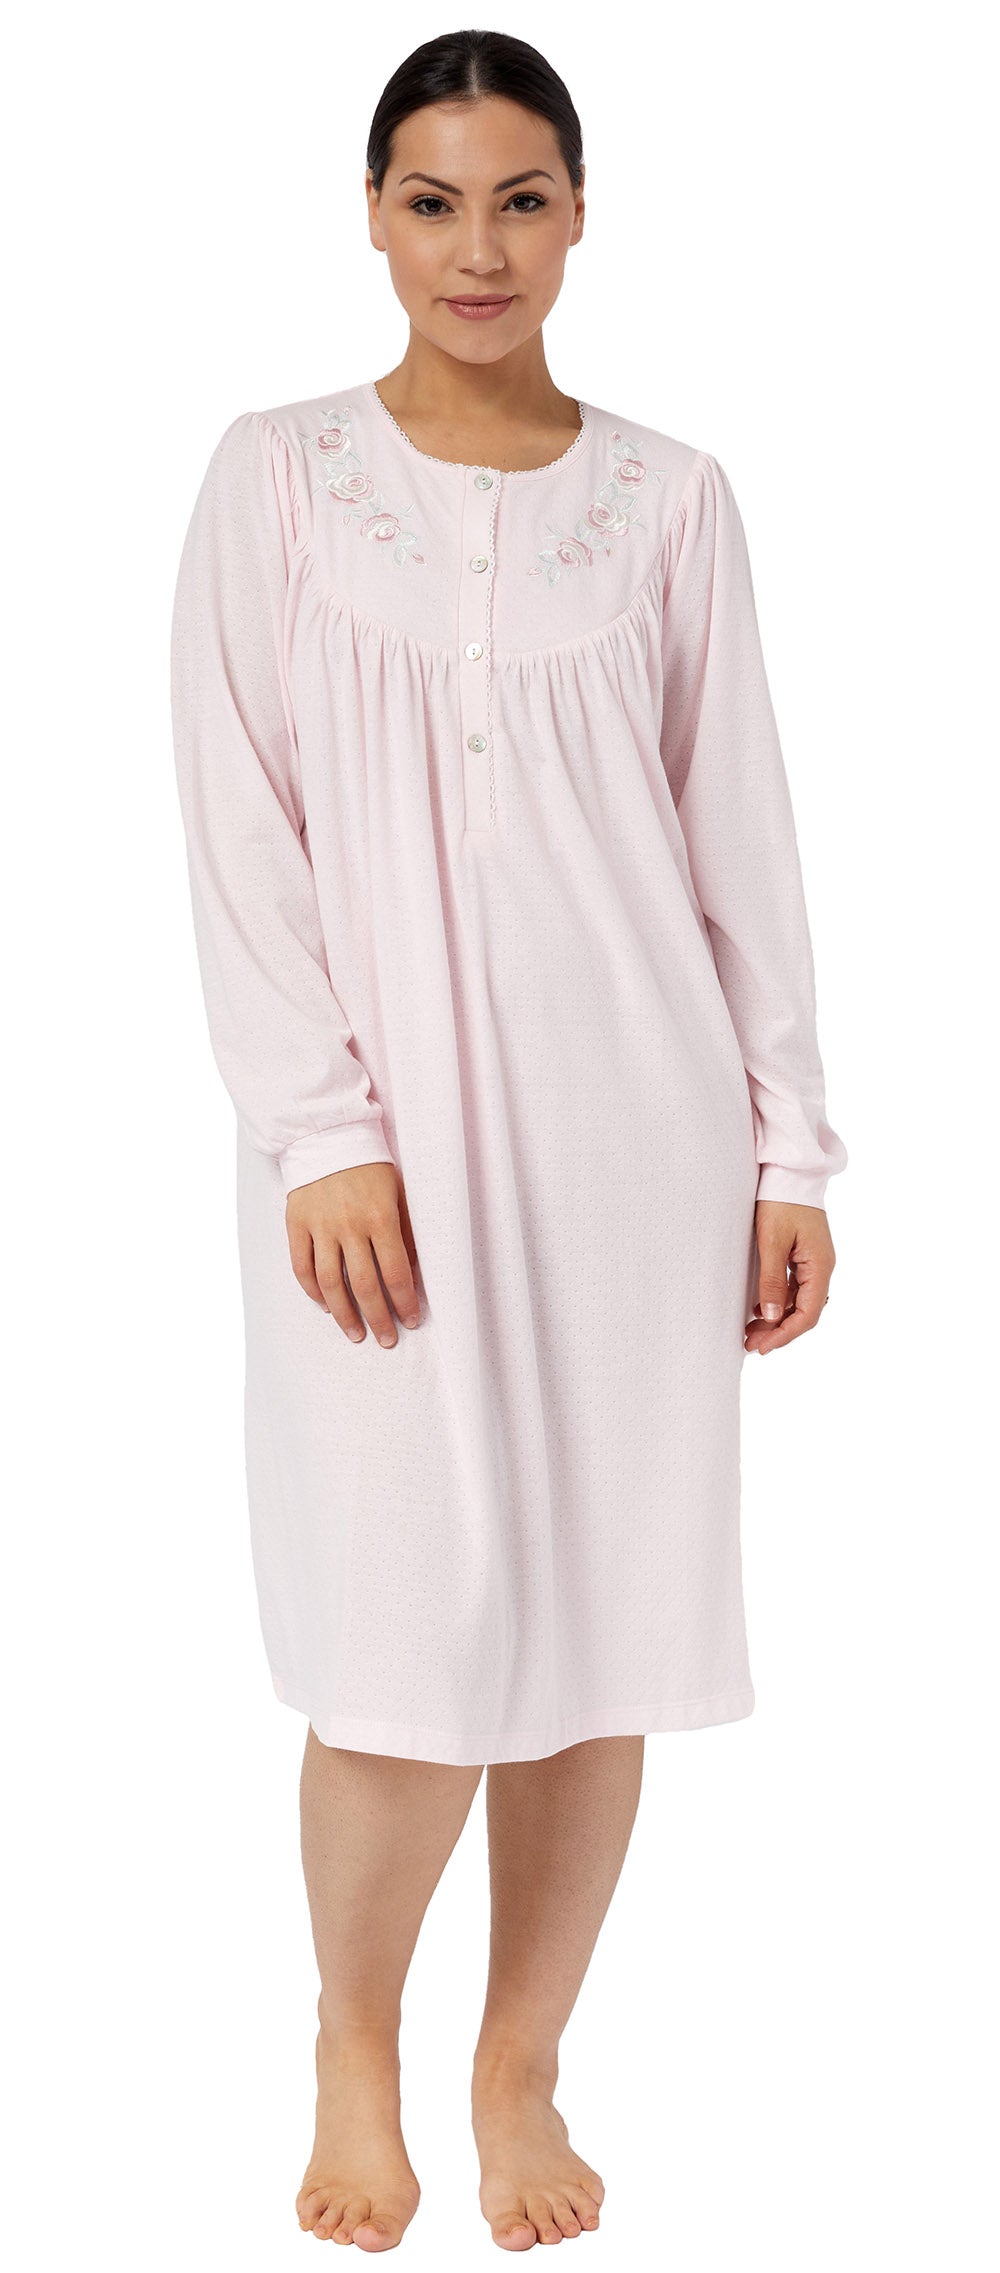 EMBROIDERED NIGHTIE PINK - SK233E